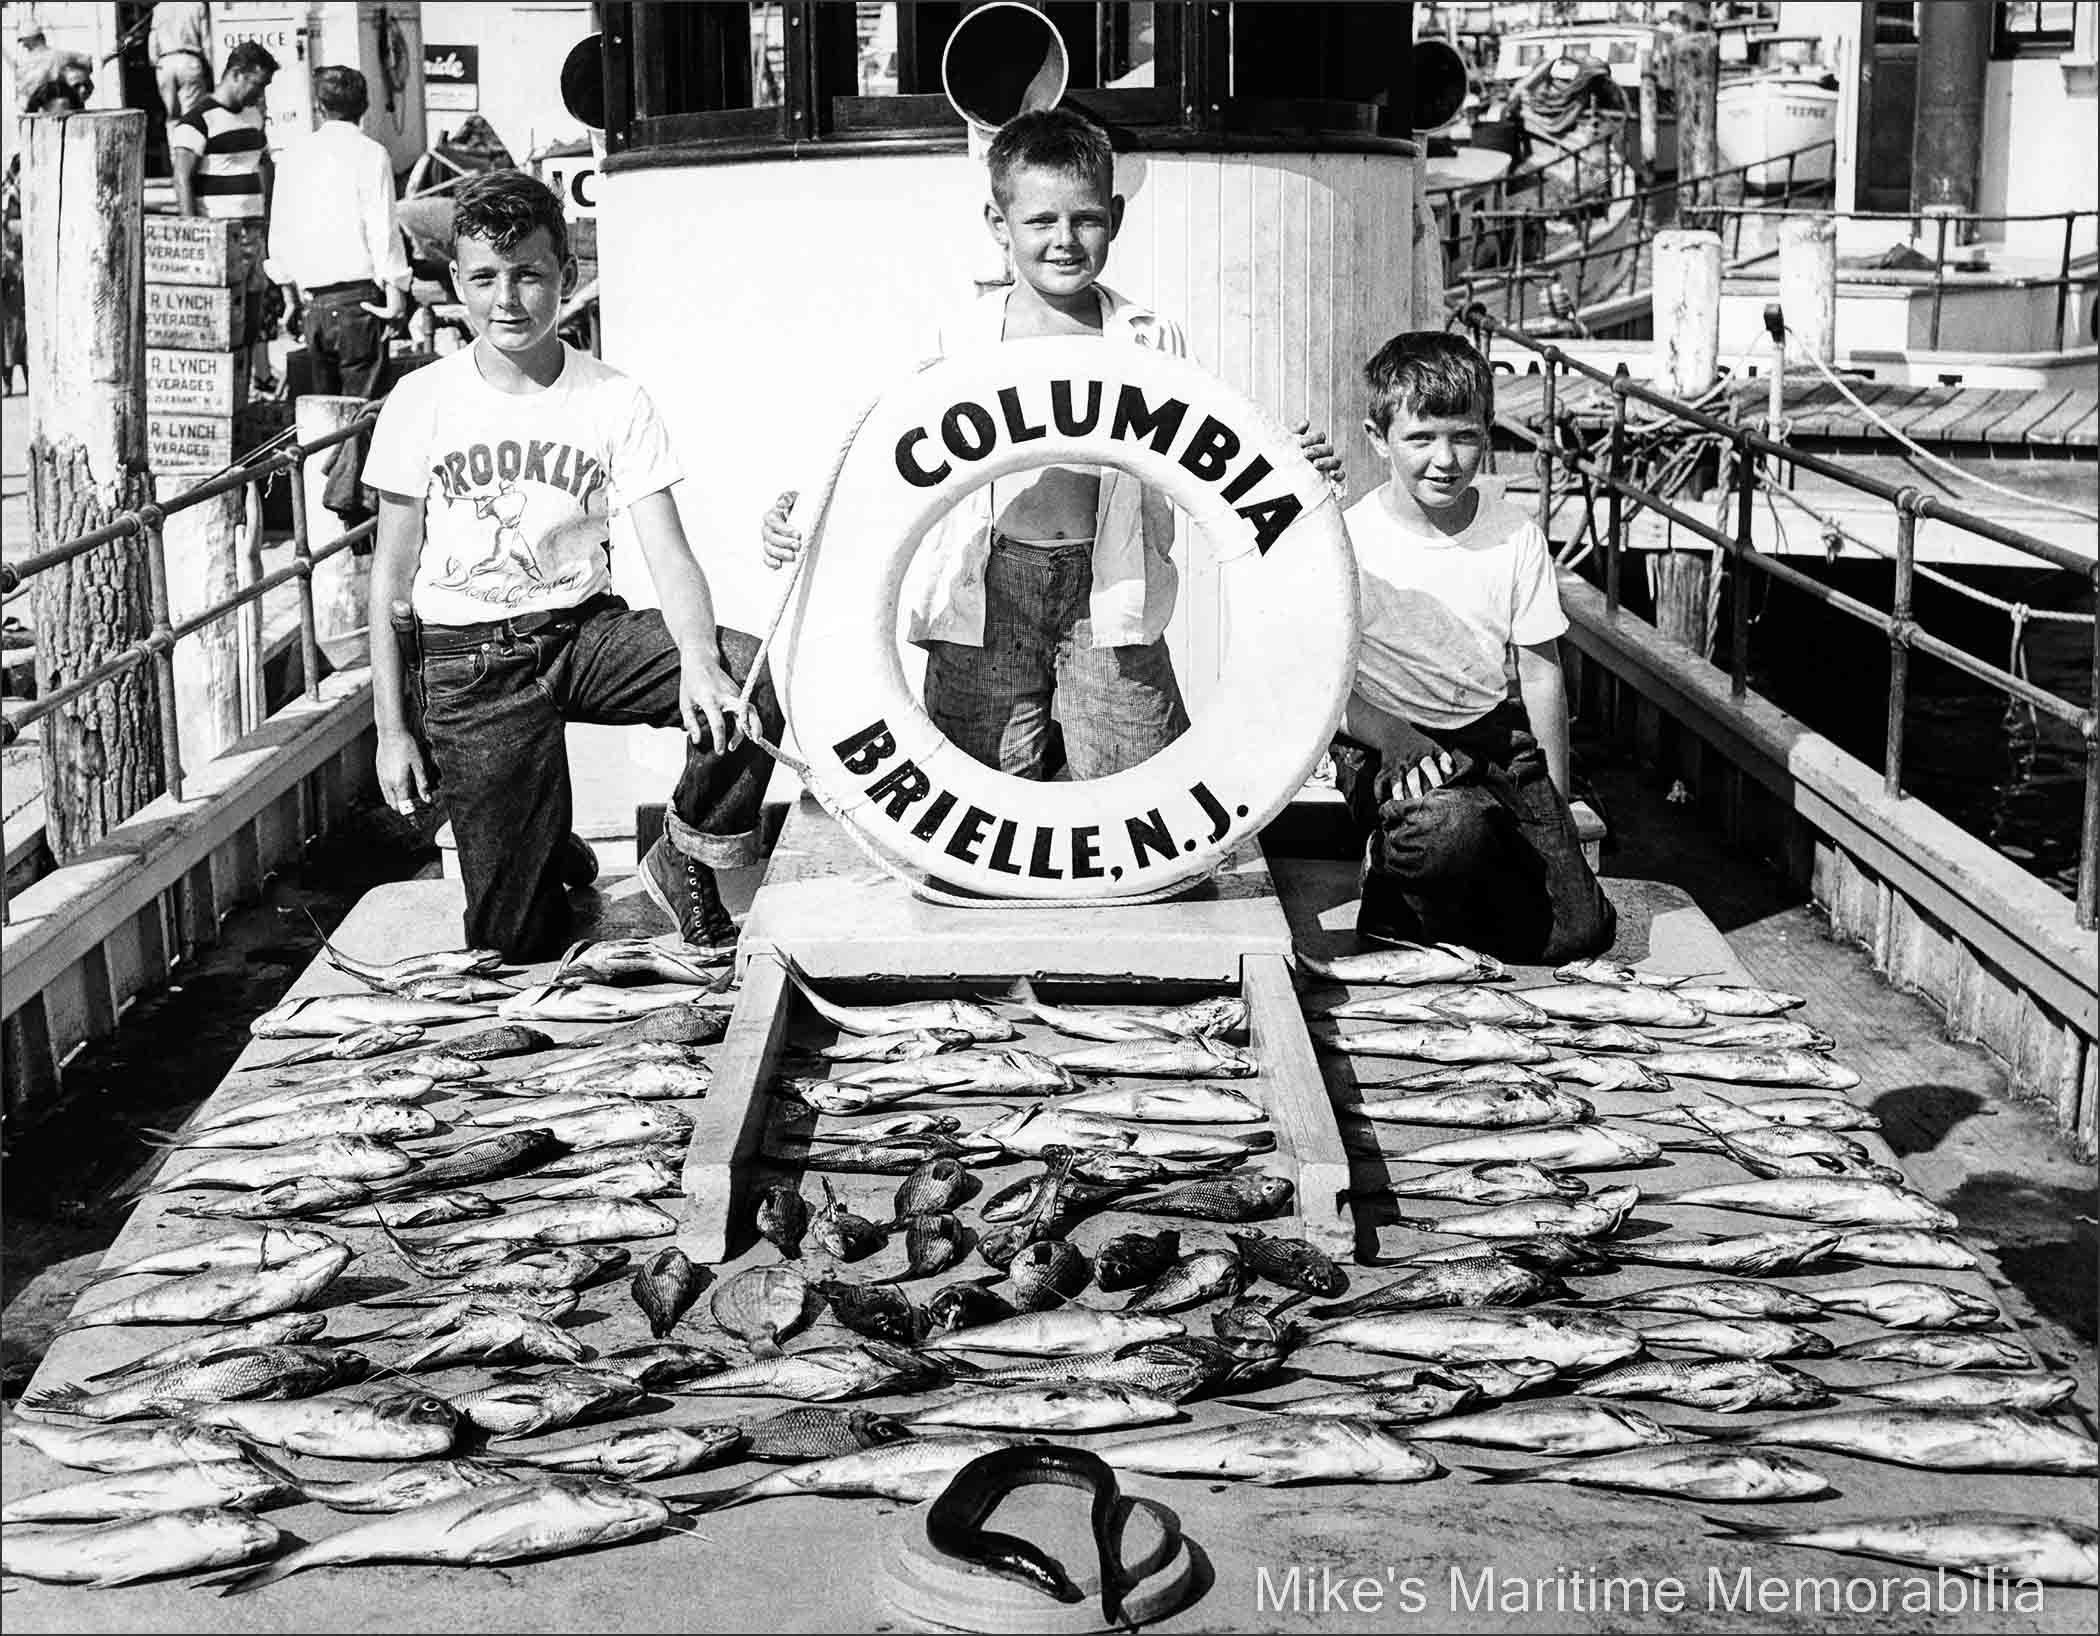 COLUMBIA fishing trip – 1950 The results of a fishing trip aboard Captain Jack Bogan's "COLUMBIA" in August 1950. Shown left to right are Jackie McGuire, Dave Bogan Sr. (who would later operate the "PENNSY", the "PARAMOUNT", the "JAMAICA" and the "CLAUDIA JO") and Bob Bogan Sr. (who would later operate the "GAMBLER".) The photo is courtesy of Captain Dave Bogan Sr.